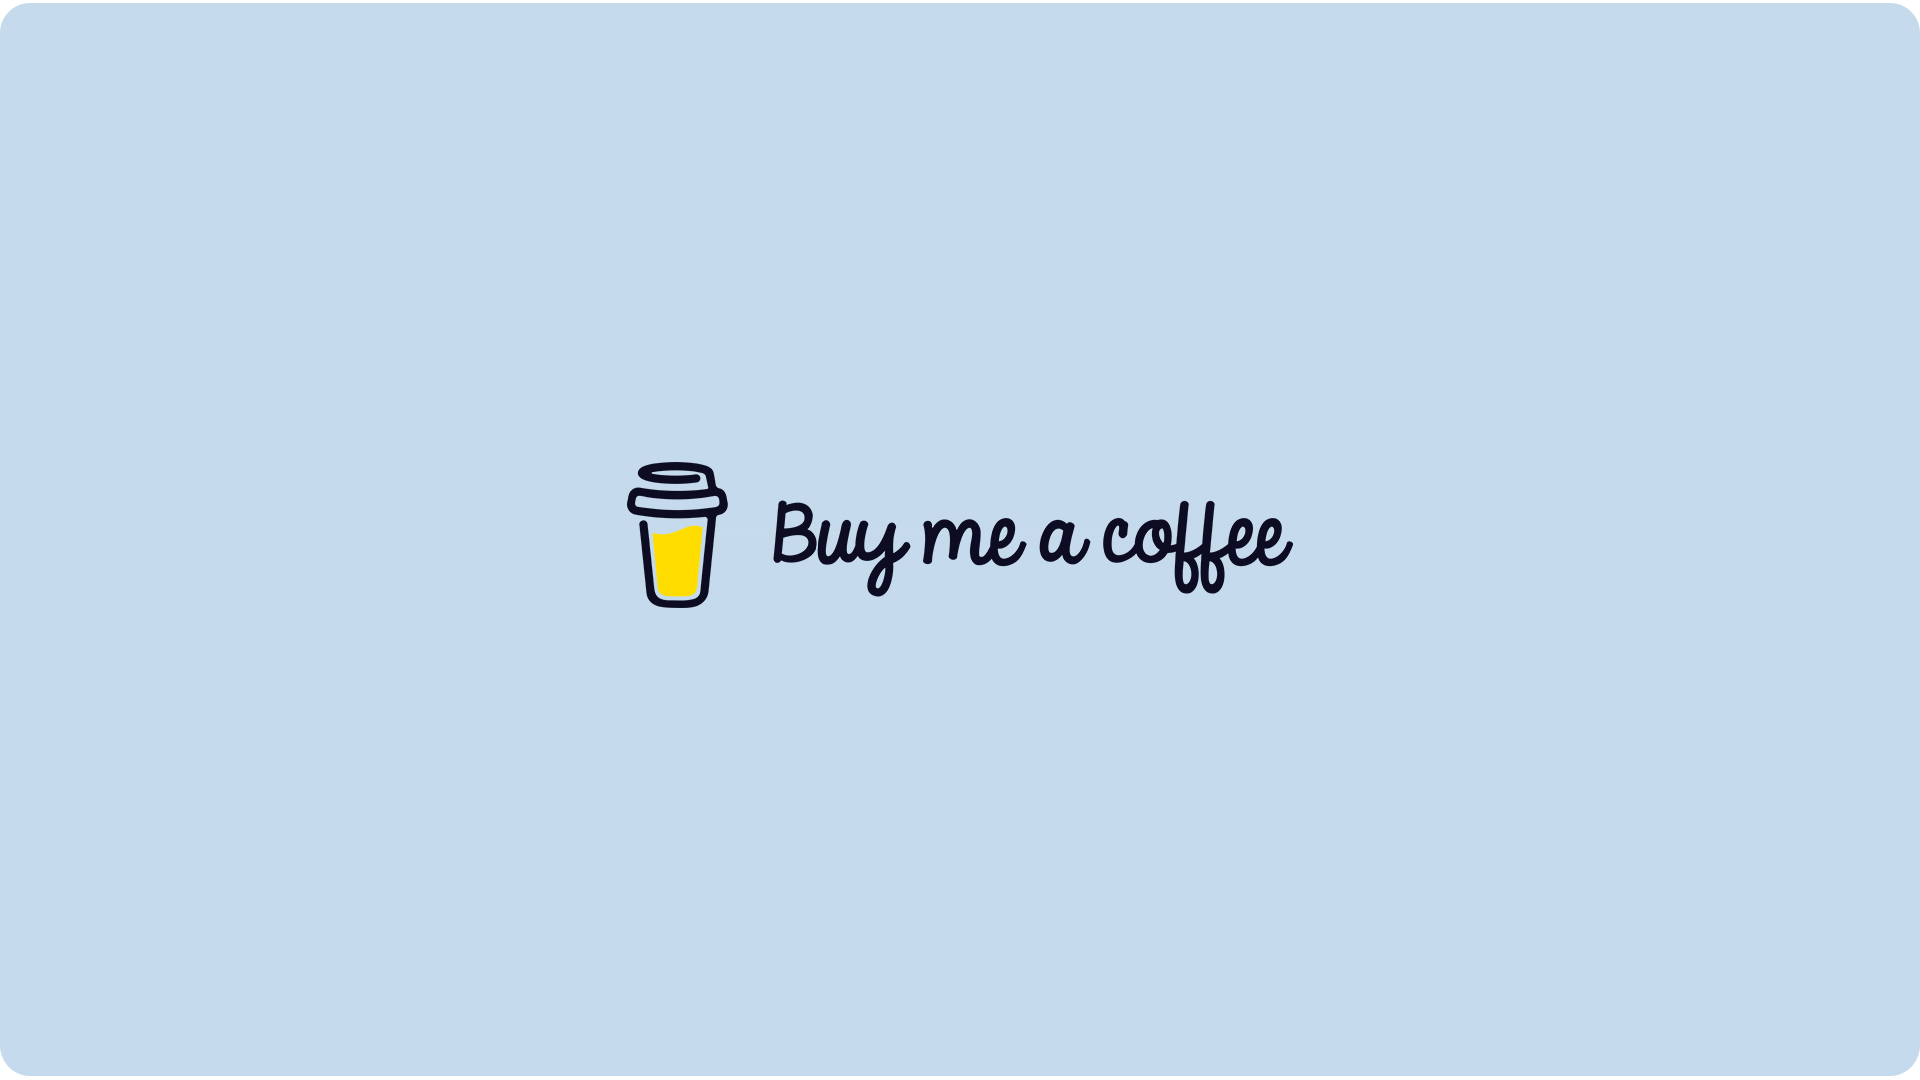 What is Buy me a Coffee